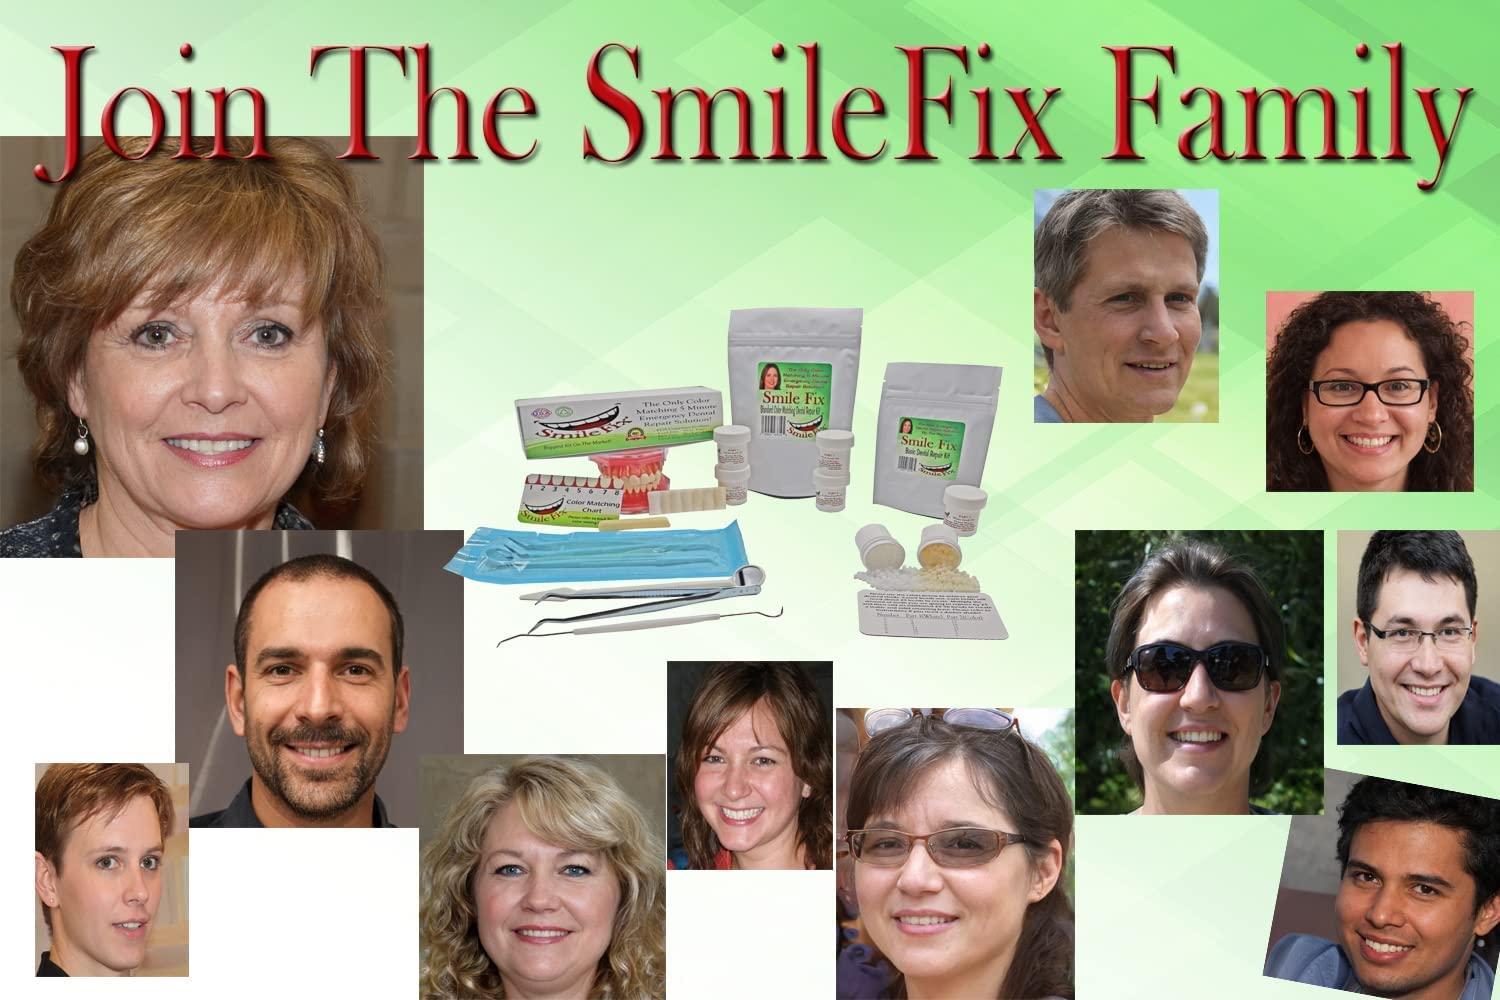 SmileFix Color Matching Deluxe Dental Repair Kit - Replace Missing or  Broken Tooth. Gaps, Broken Teeth Space Temporary Quick & Safe. Regain Your